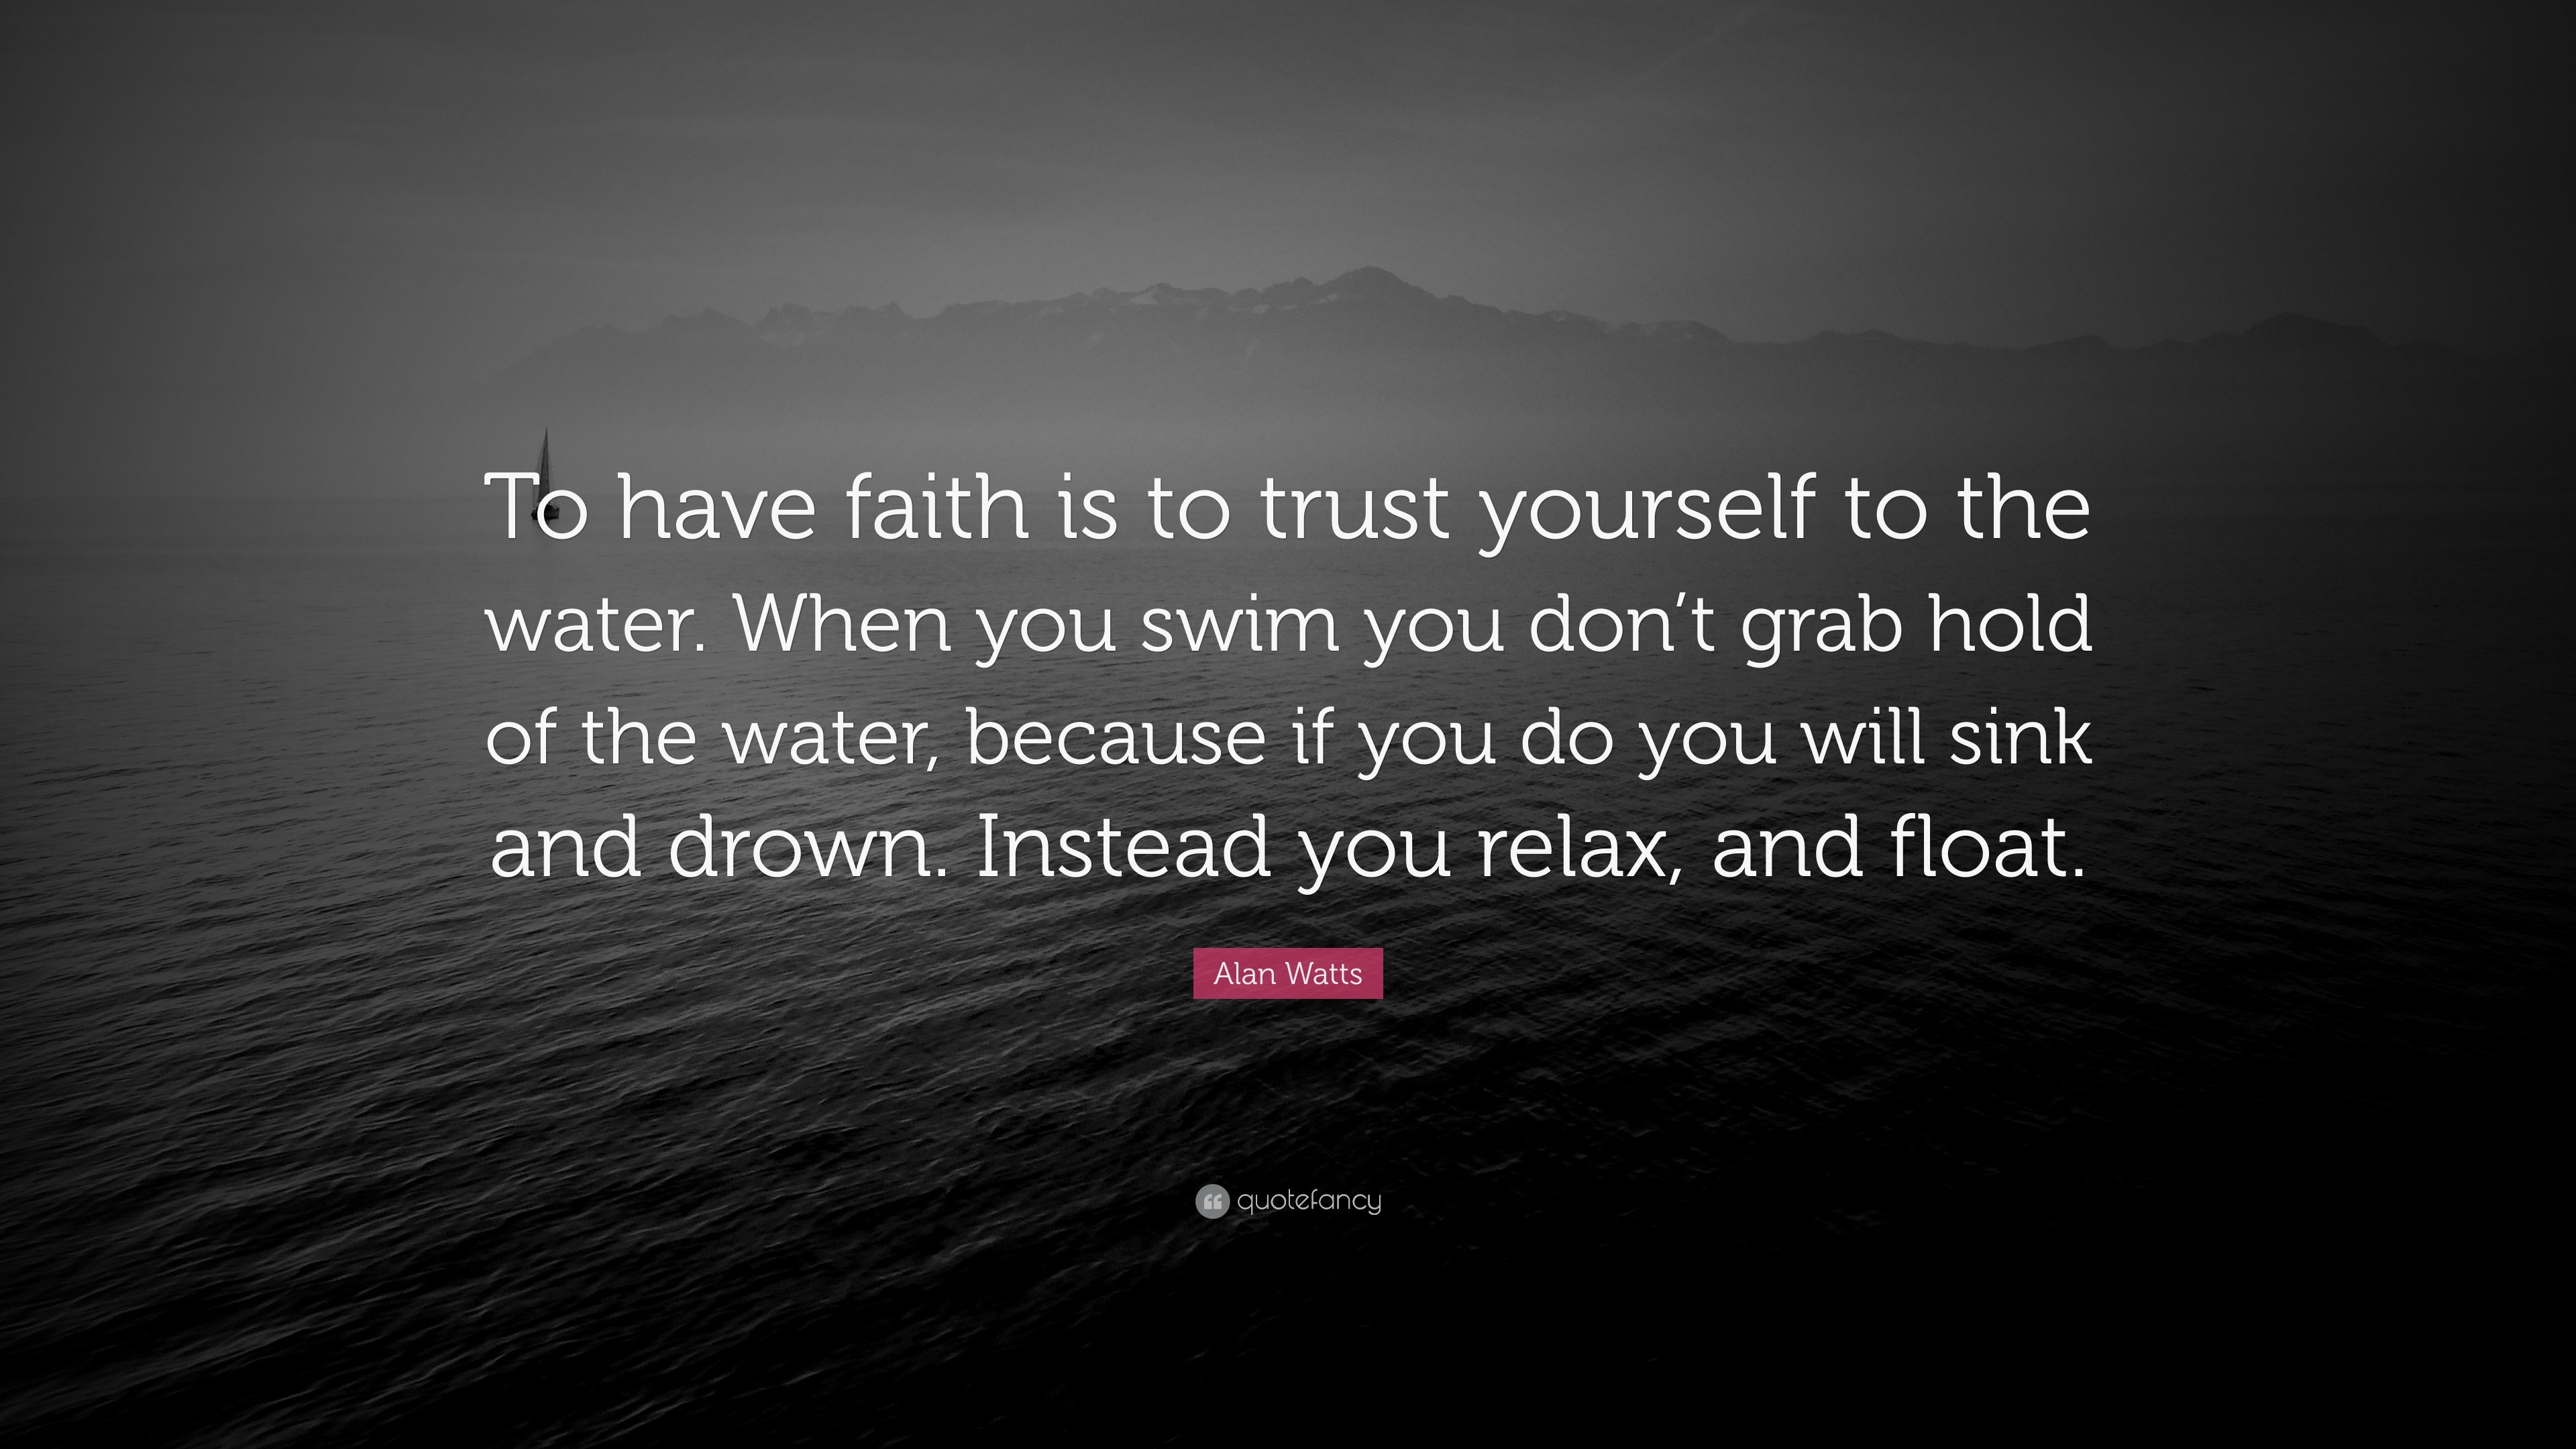 Alan Watts Quote To have faith is to trust yourself to the water